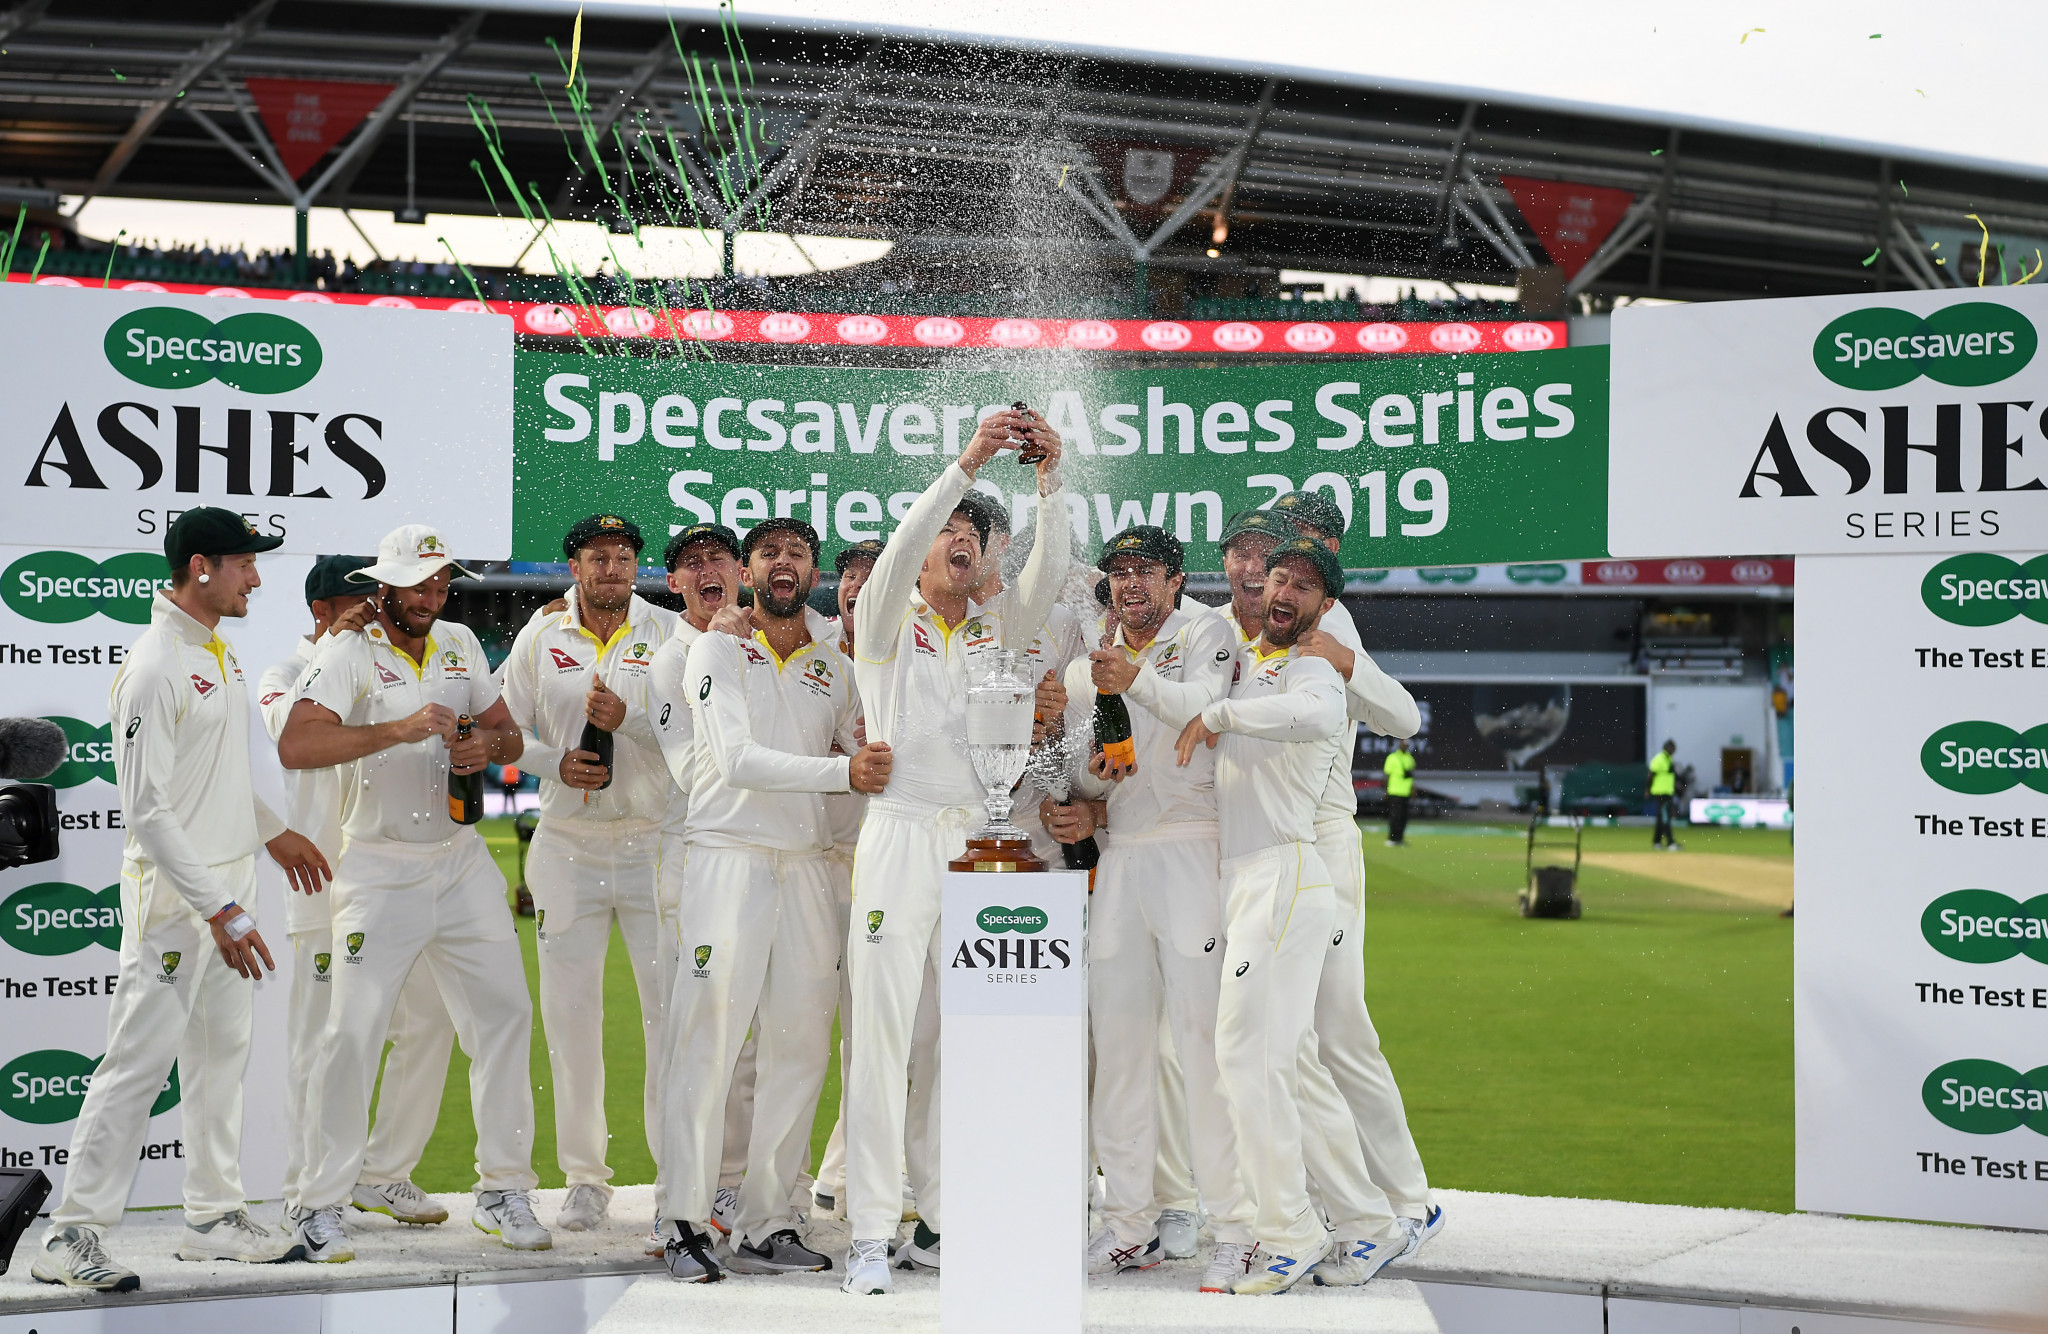 Australia hold The Ashes going into the 2021-2022 series following a draw in the previous edition in England in 2019 ©Getty Images 